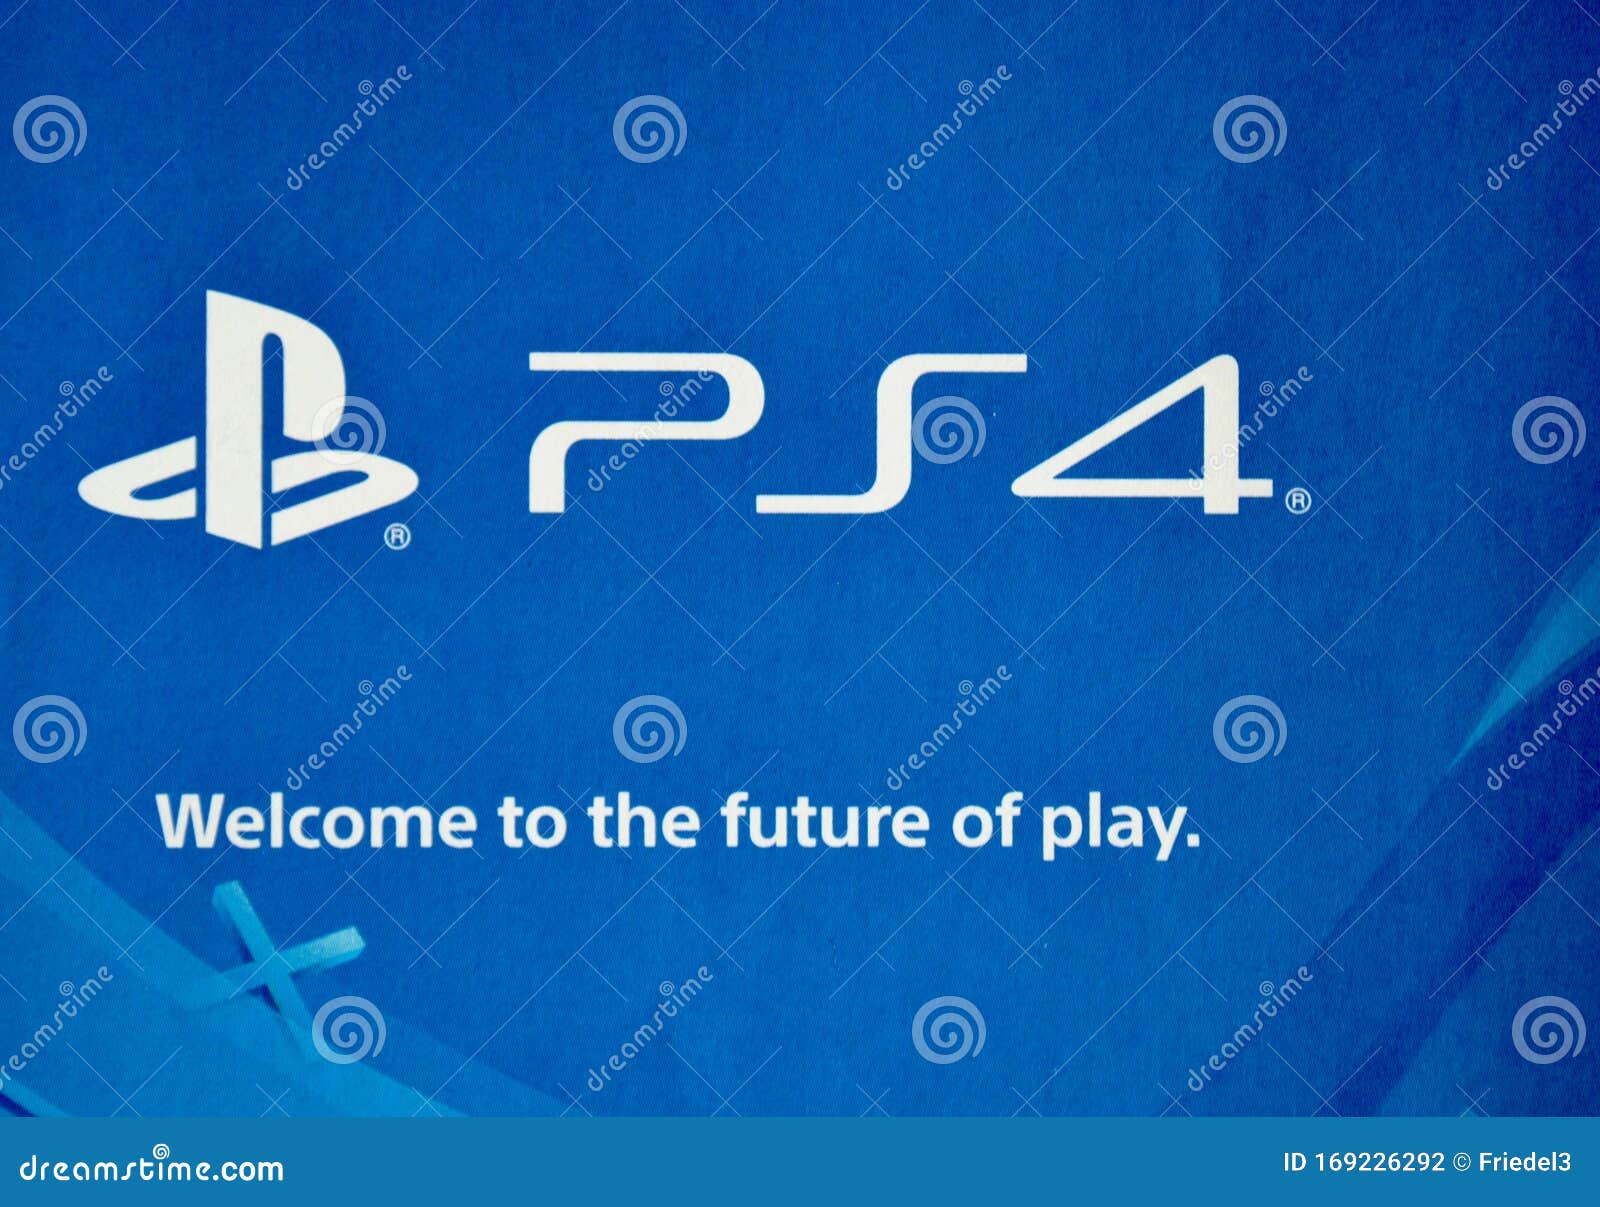 Ps4 Logo And Slogan On Blue Editorial Photography Image Of Blue Playstation